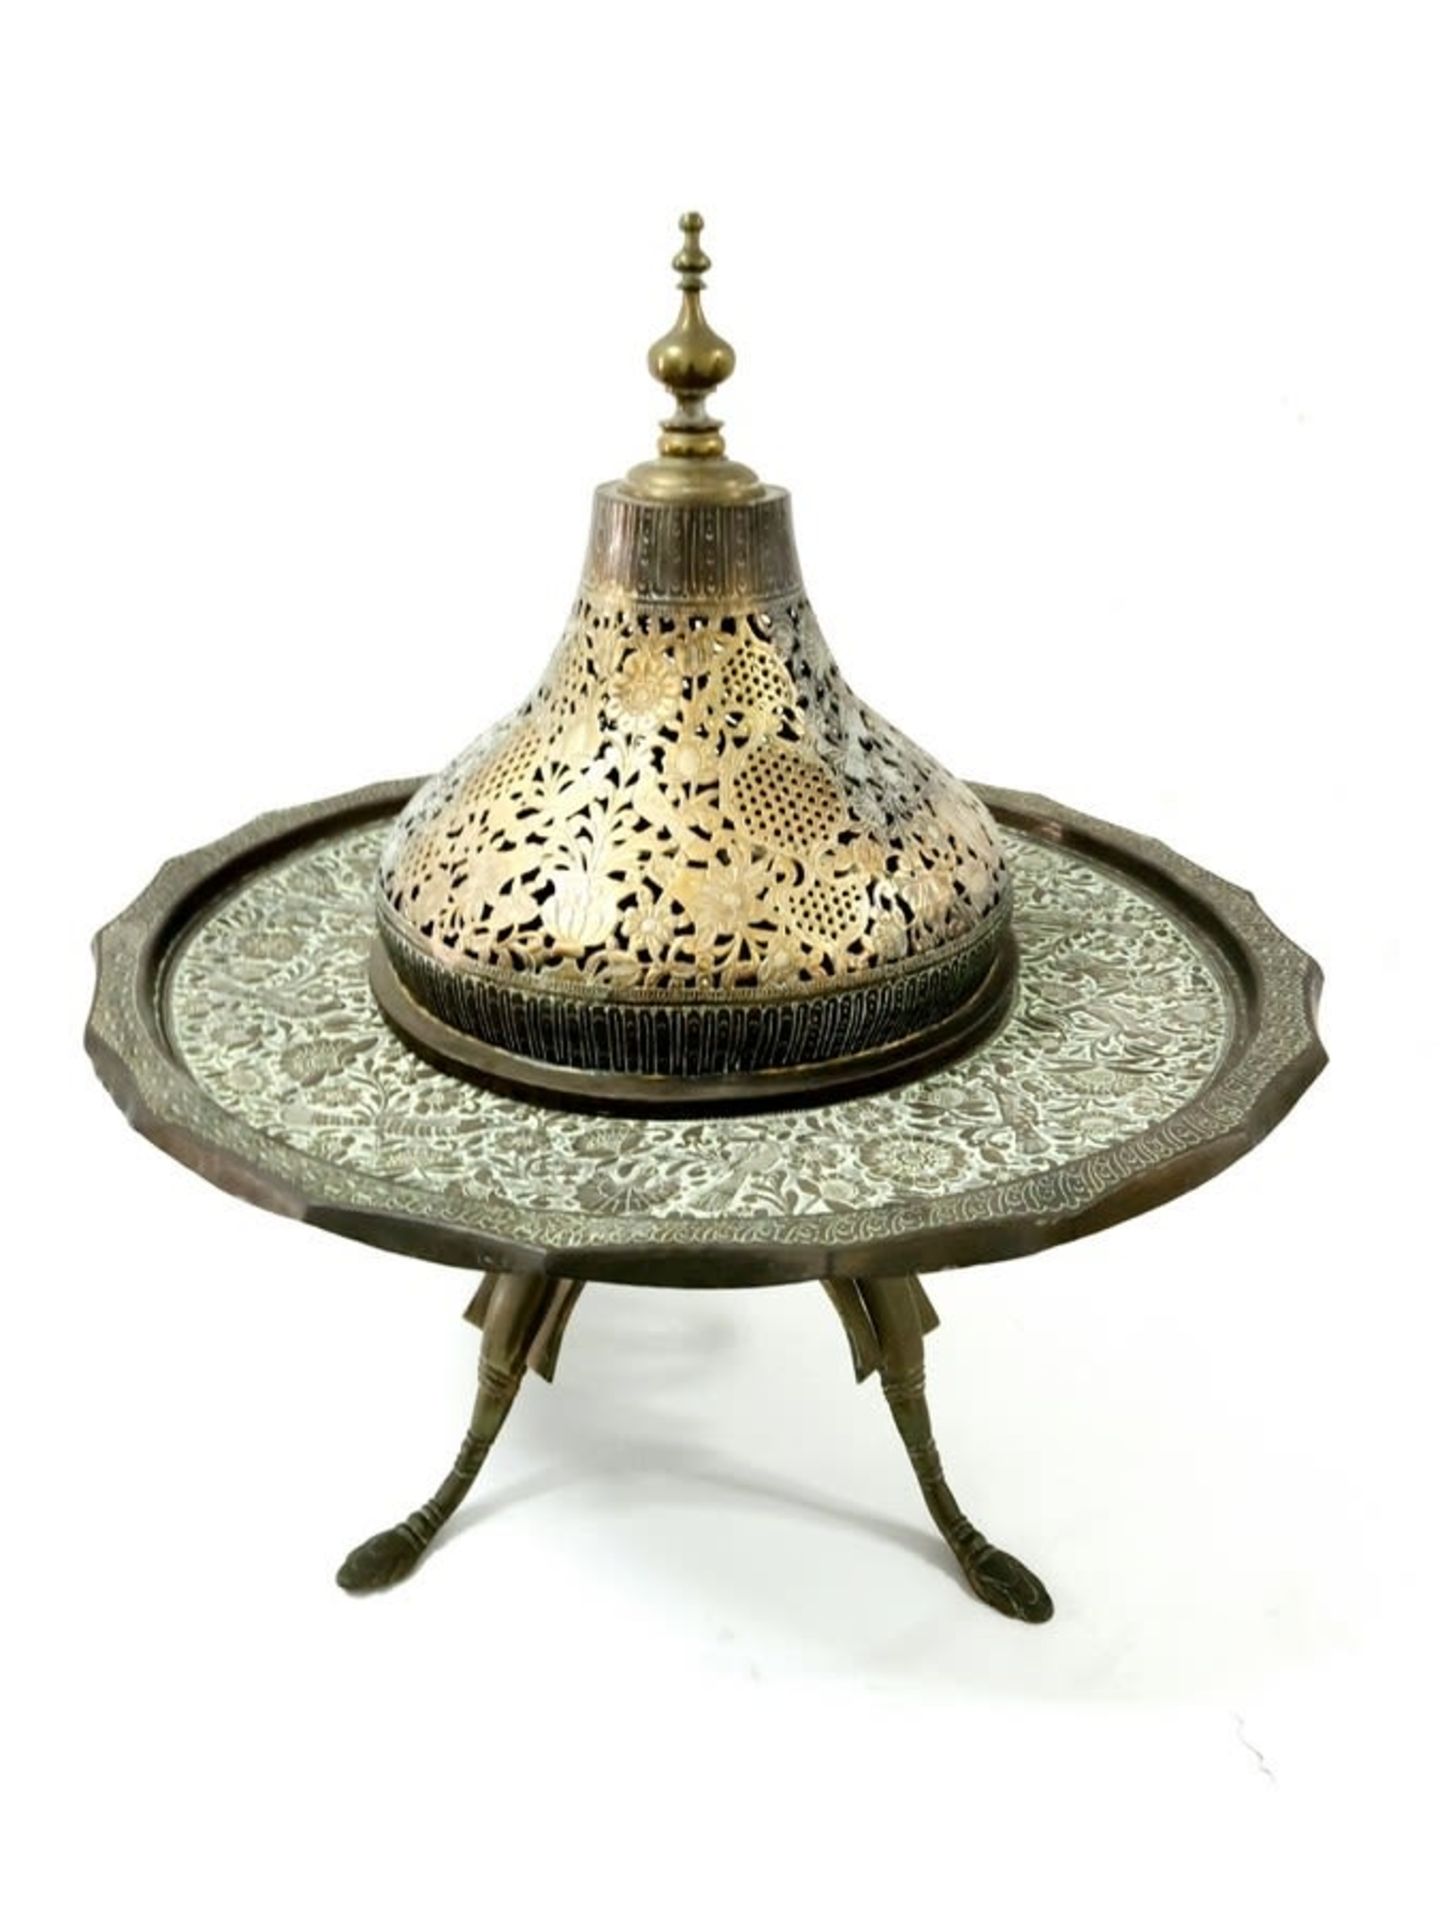 Impressive and high-quality antique Ottoman Turkish brazier, made of hammered and engraved sawn - Image 2 of 8